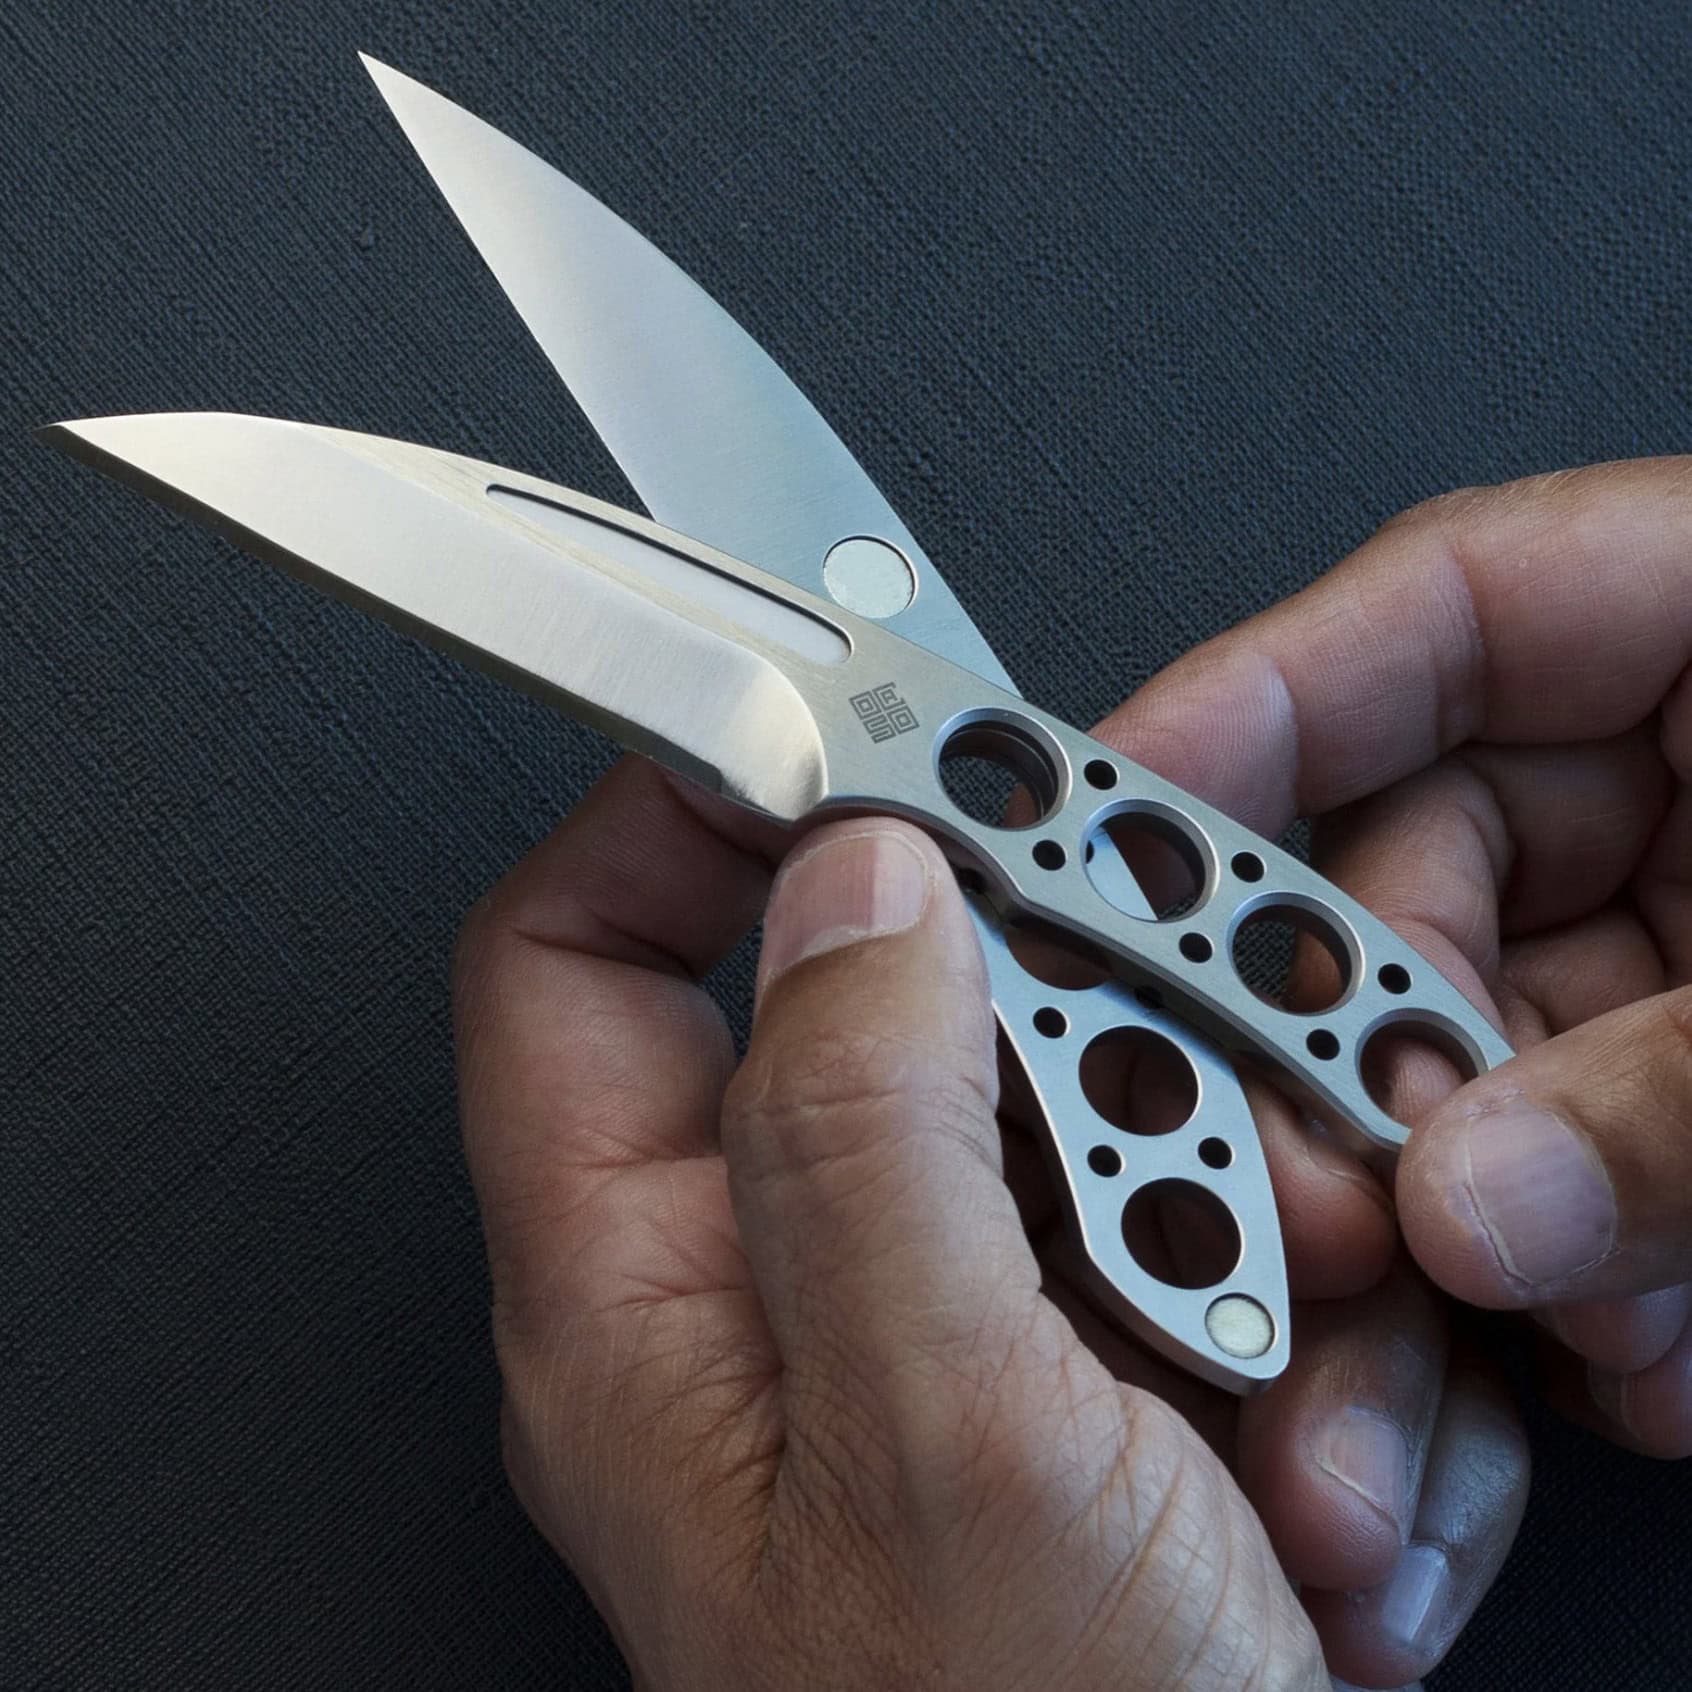 The Duo Desk knife splits into two separate knives.